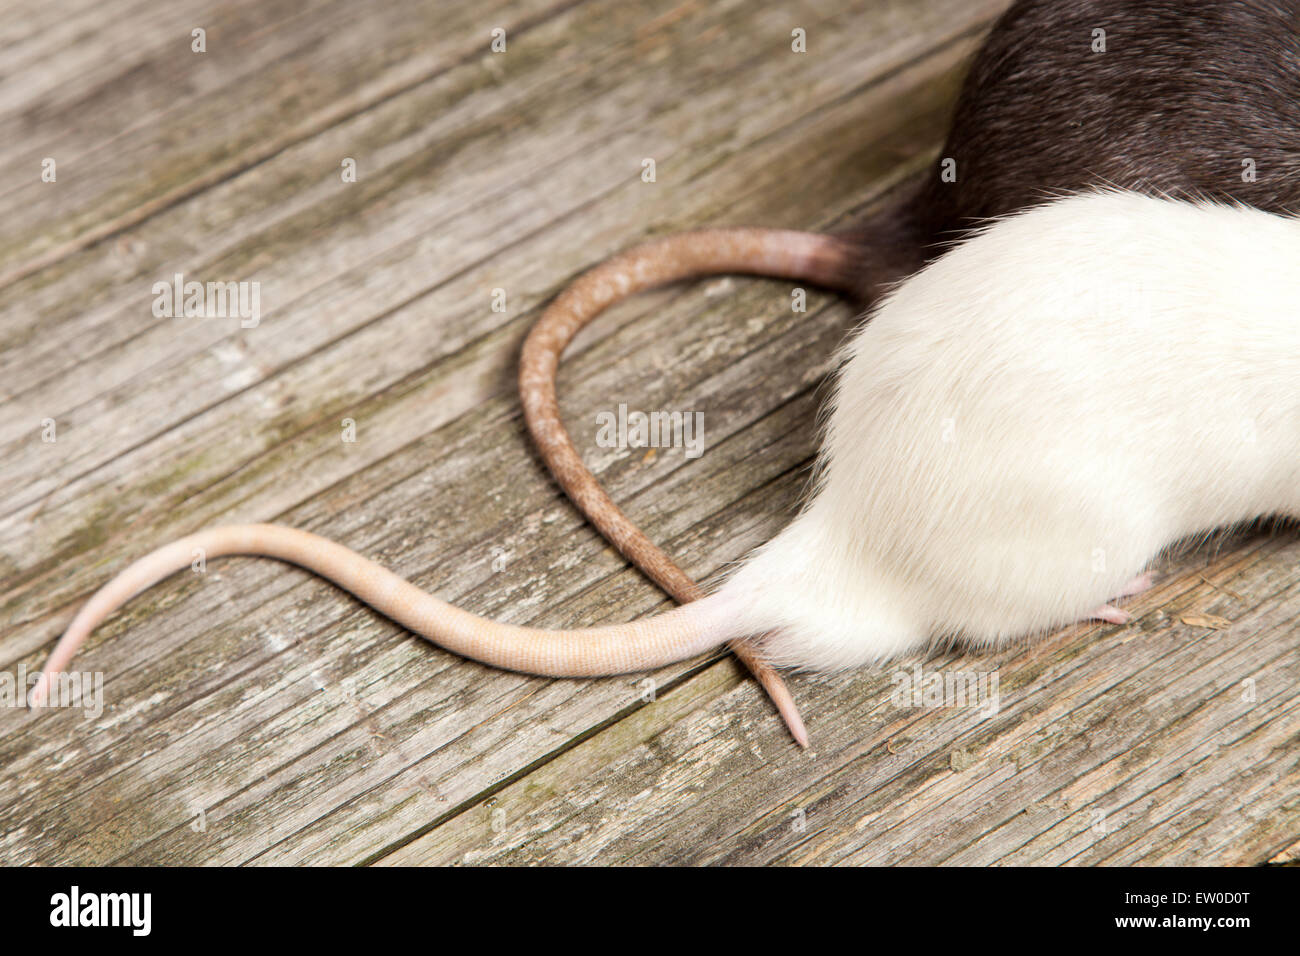 Tails of rats on a wooden table Stock Photo